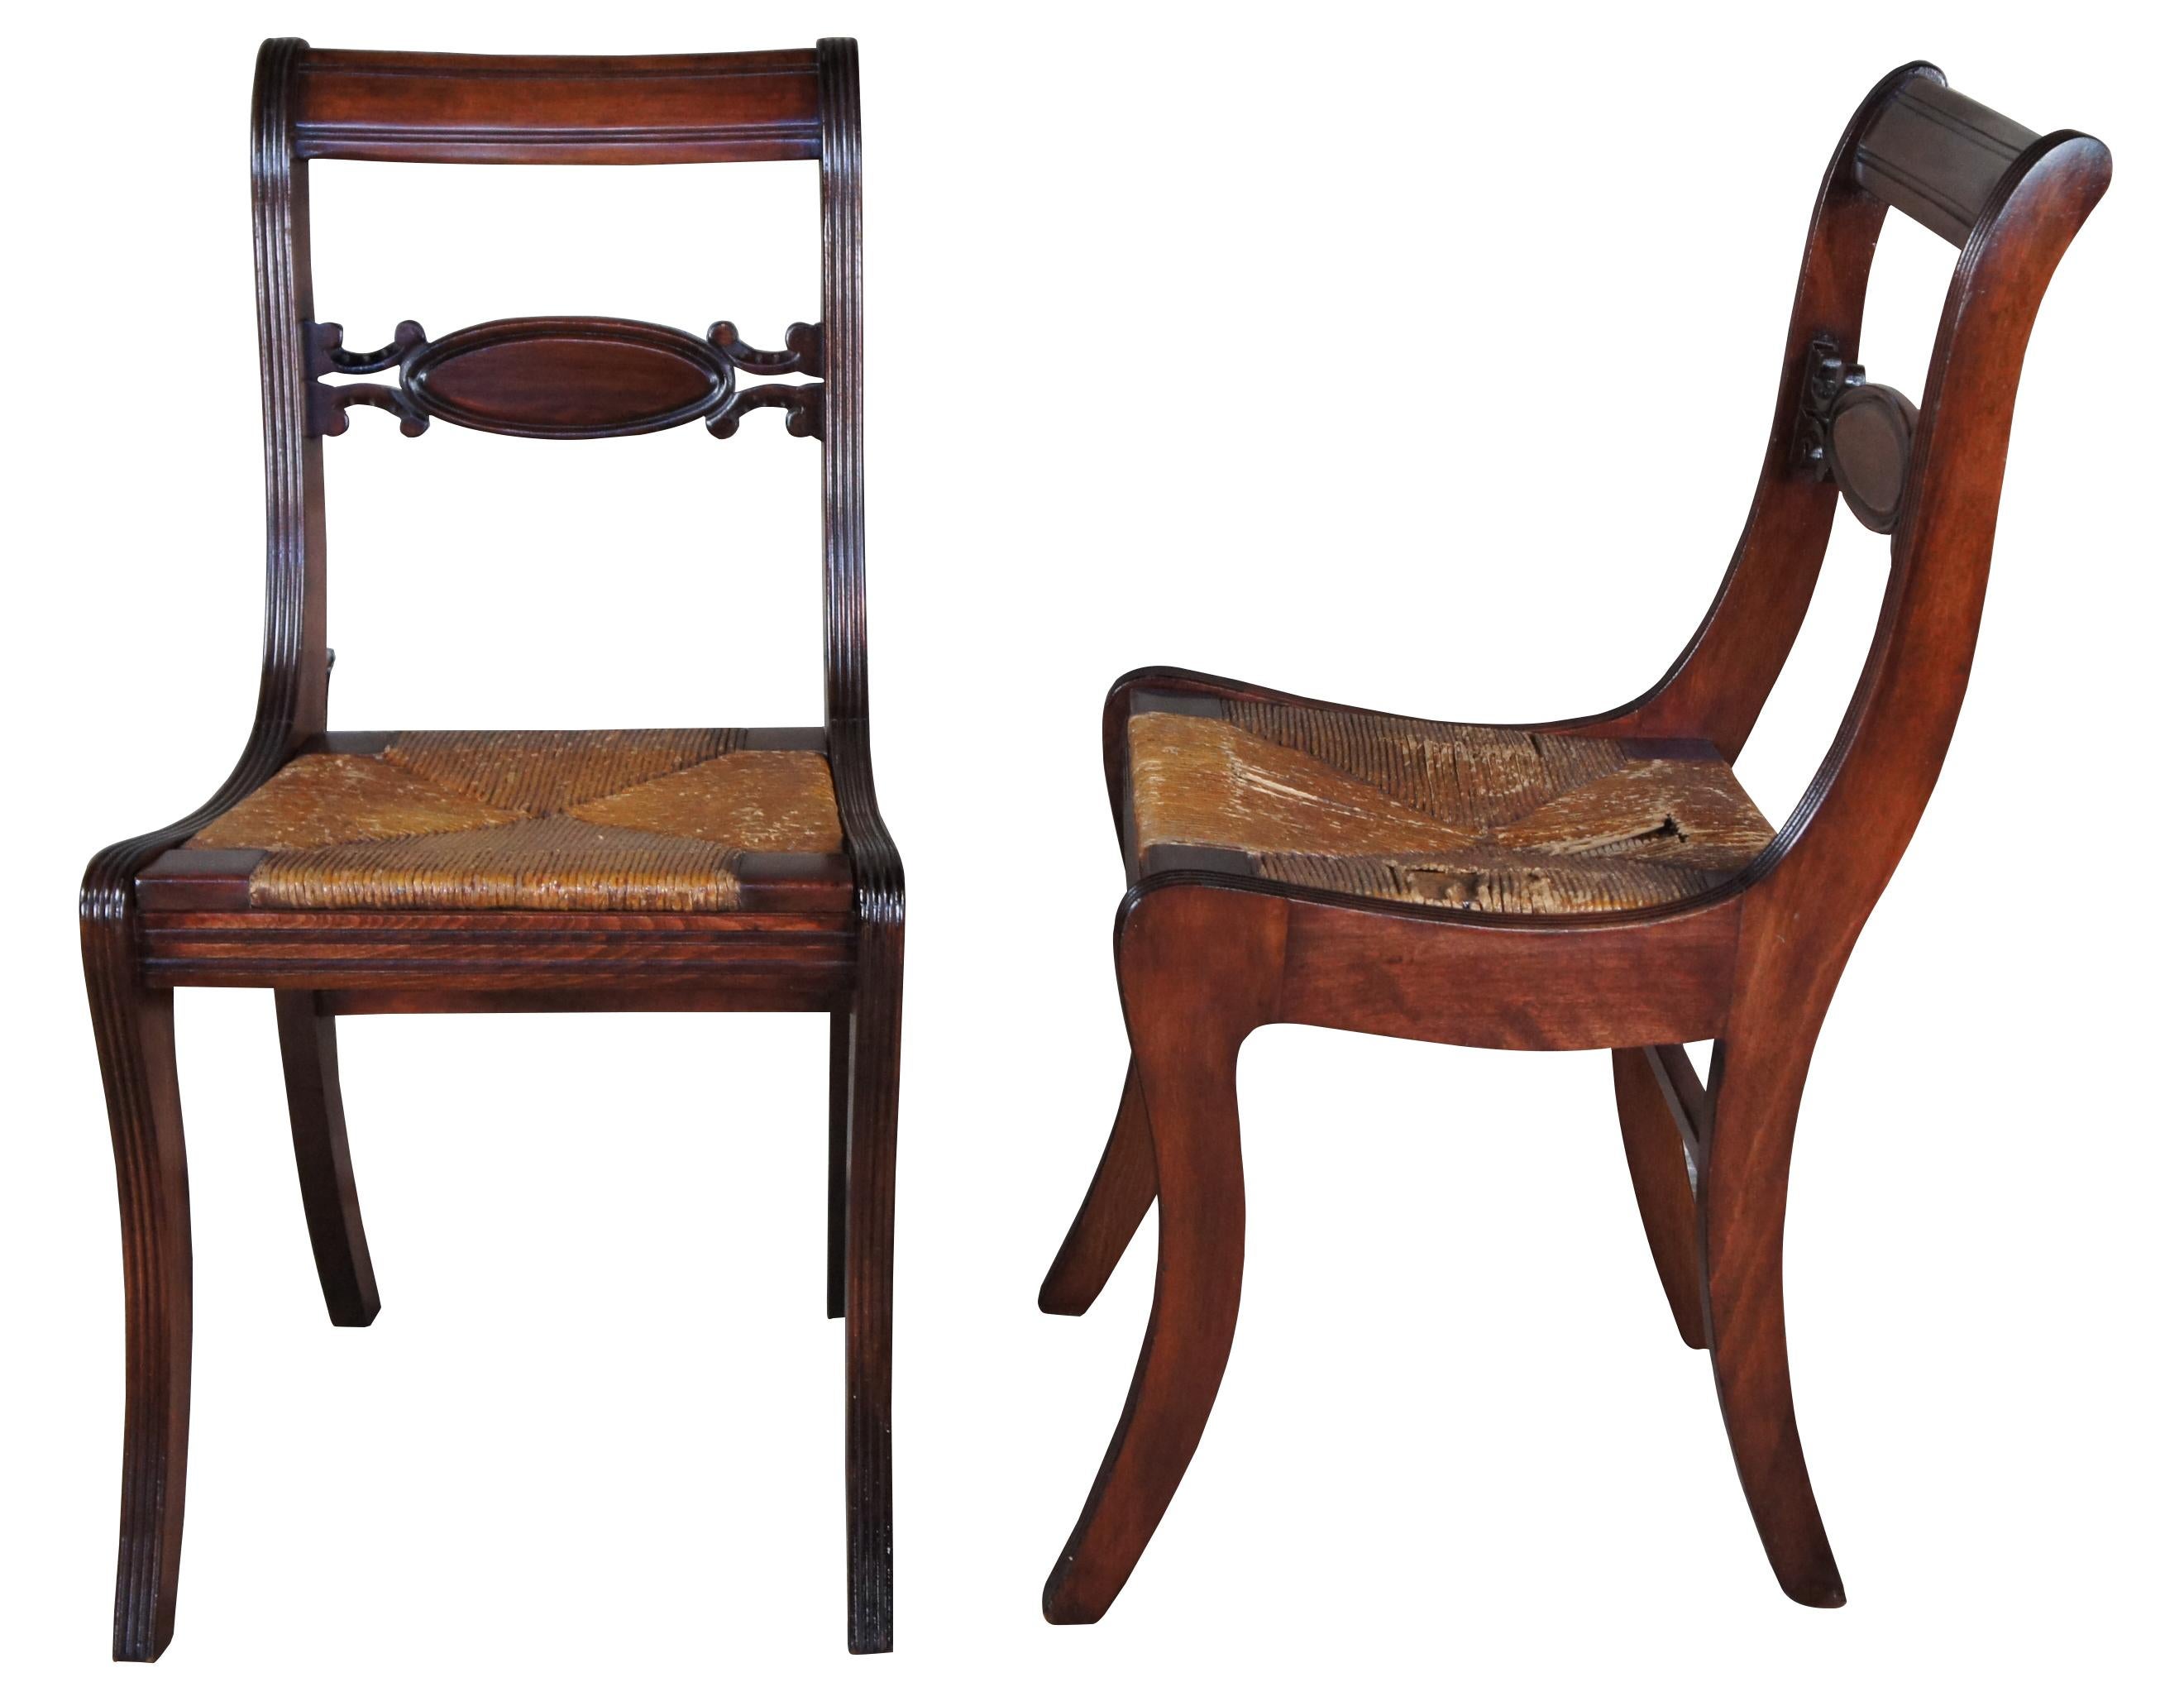 4 early 20th century Duncan Phyfe or Englsih Regency style dining chairs. Features fluted stiles and caned seats.
 